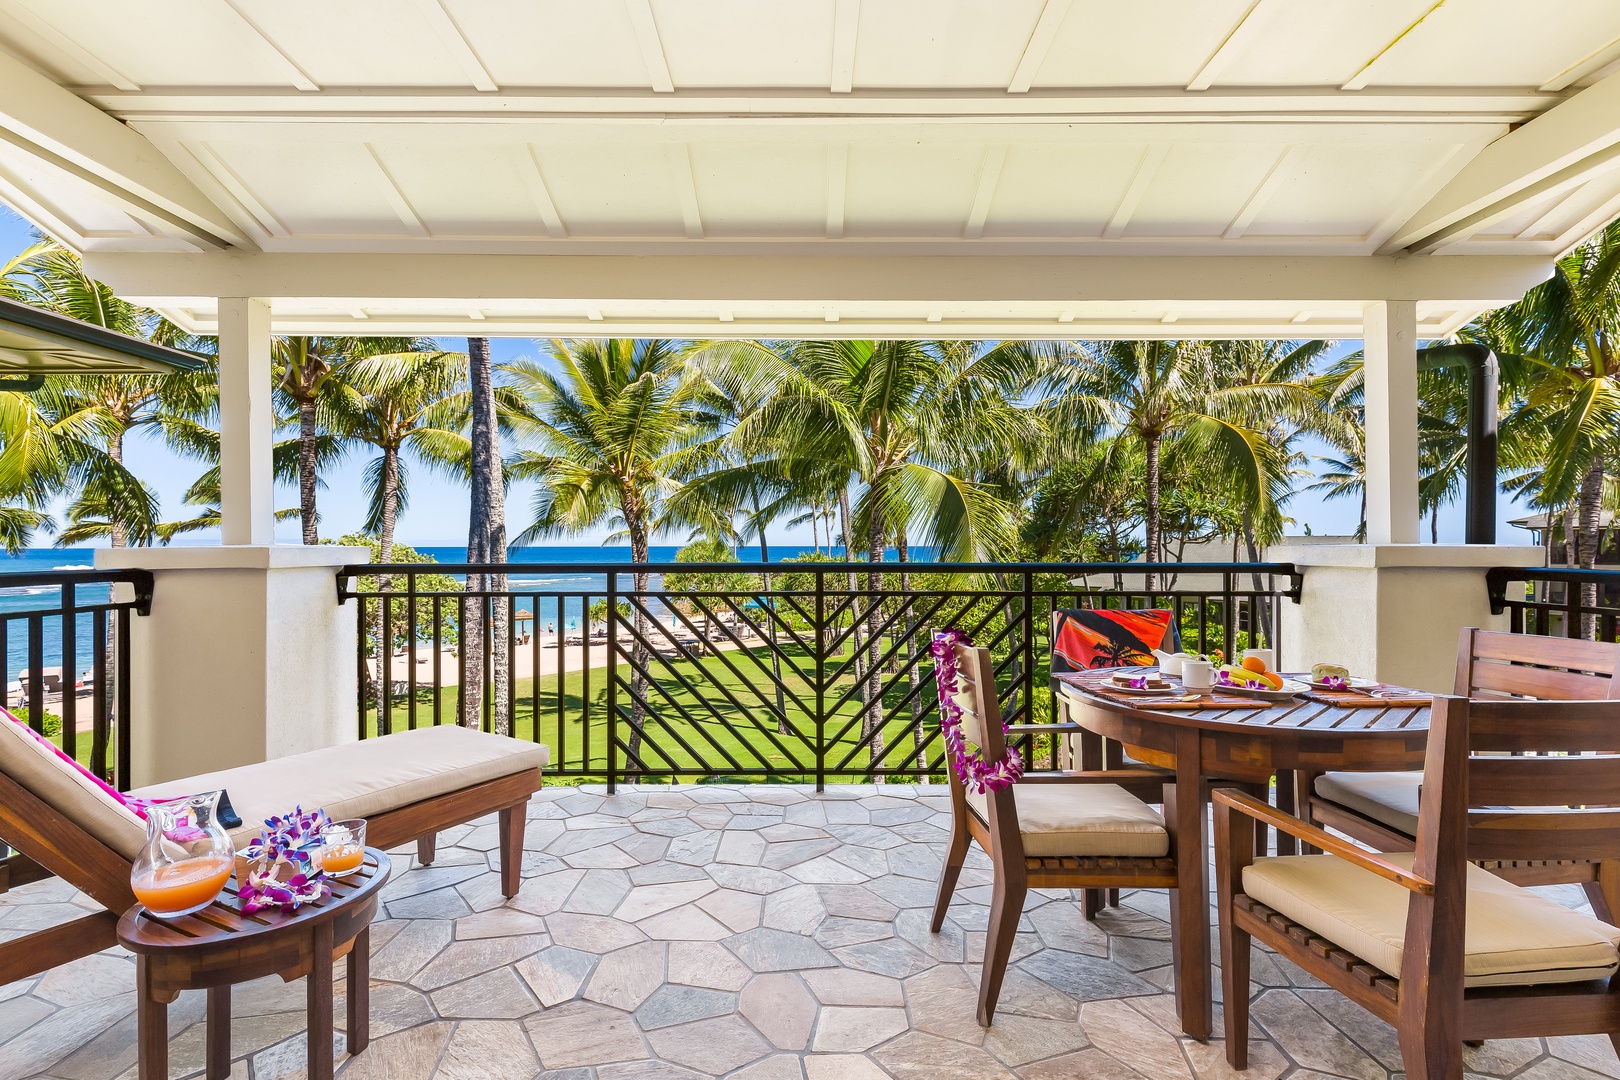 Kahuku Vacation Rentals, Turtle Bay Villas 304 - Boasting spectacular views of the sparkling ocean, tropical courtyard, and nearby pool area, this 3rd-floor condo offers everything you’d desire for an unforgettable stay .